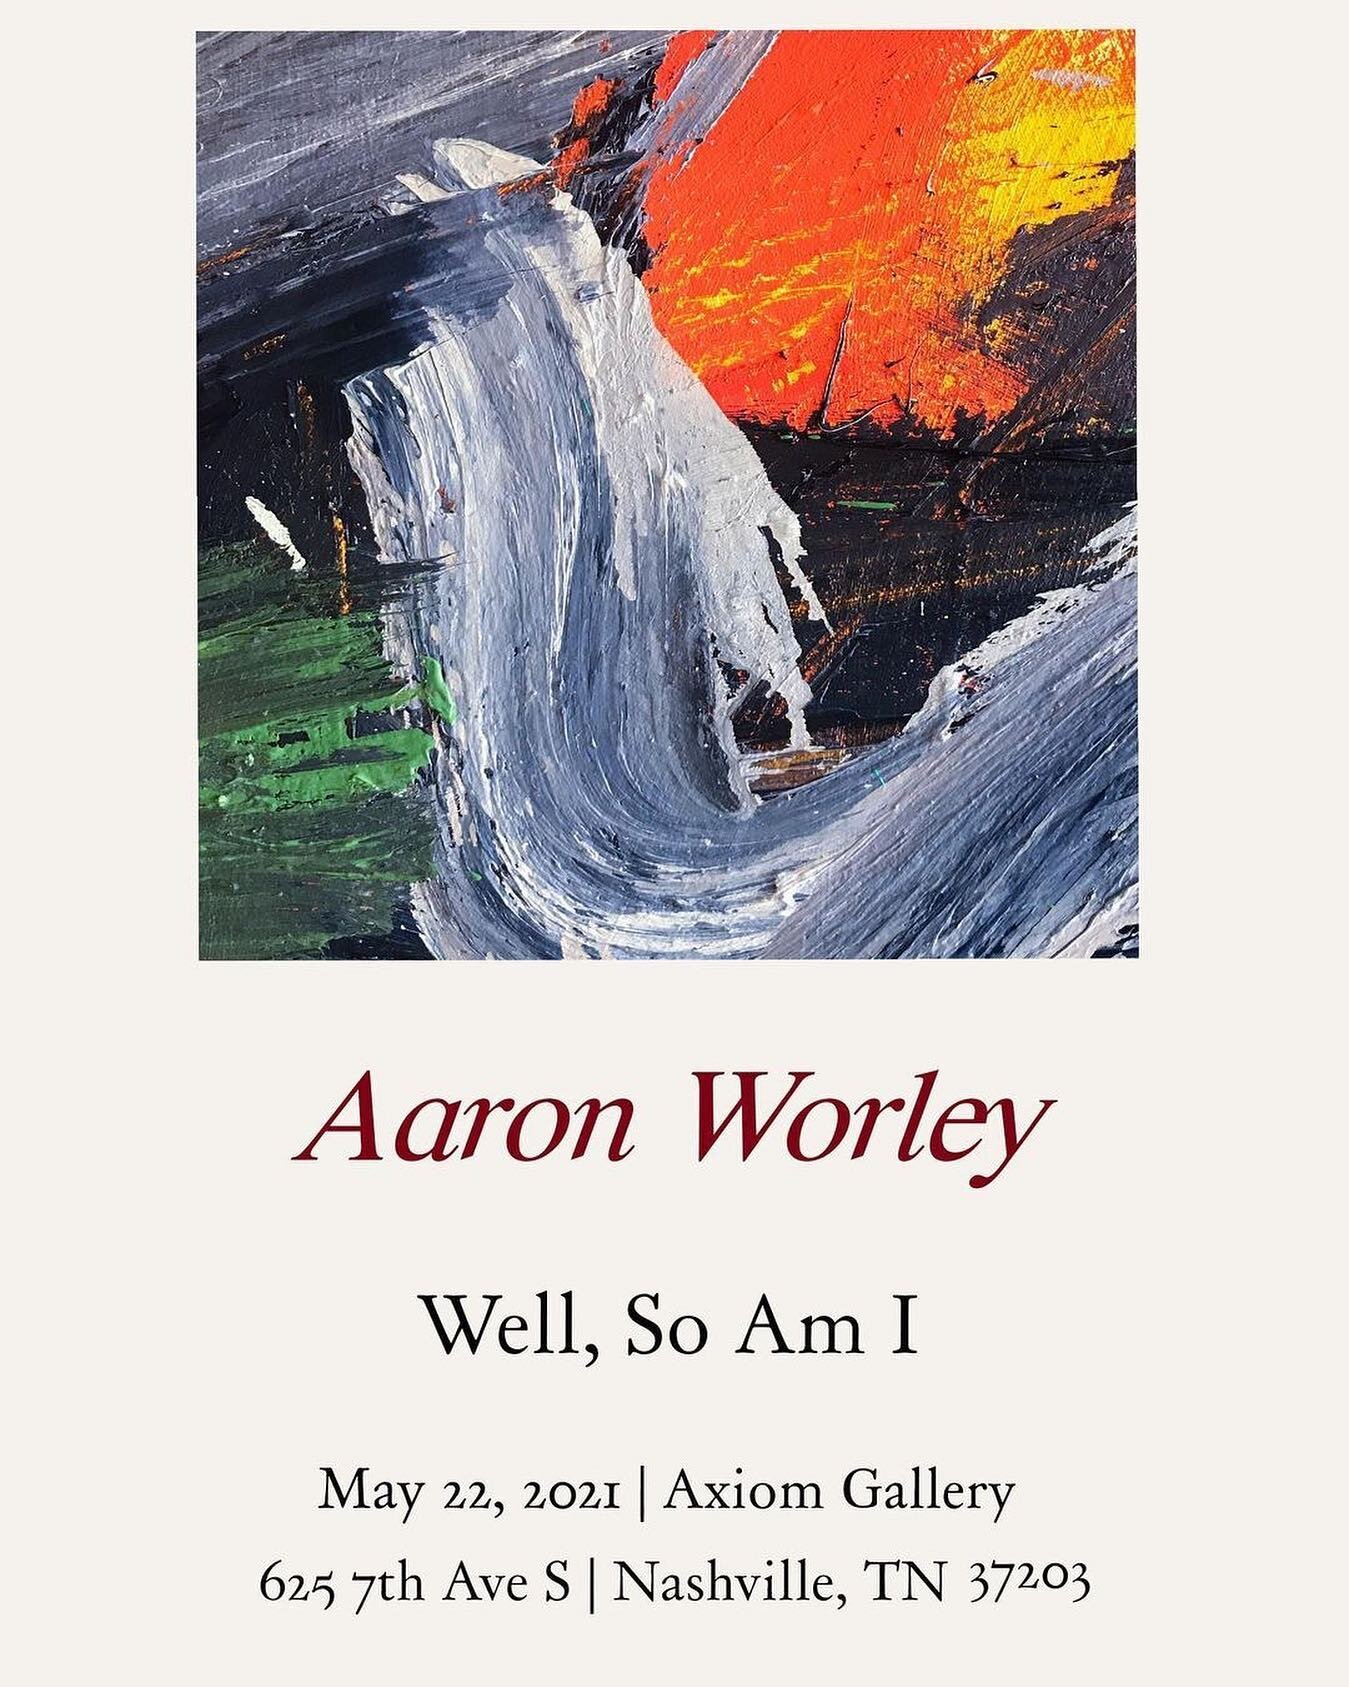 Aaron Worley @presidentlonely debuts his first solo exhibit tonight! 
At Axiom Gallery - Next to @thirdmanrecords 
🎨
REPOST &bull; @presidentlonely Super excited to announce my very first solo show in Nashville, &ldquo;Well, So Am I.&rdquo; It will 